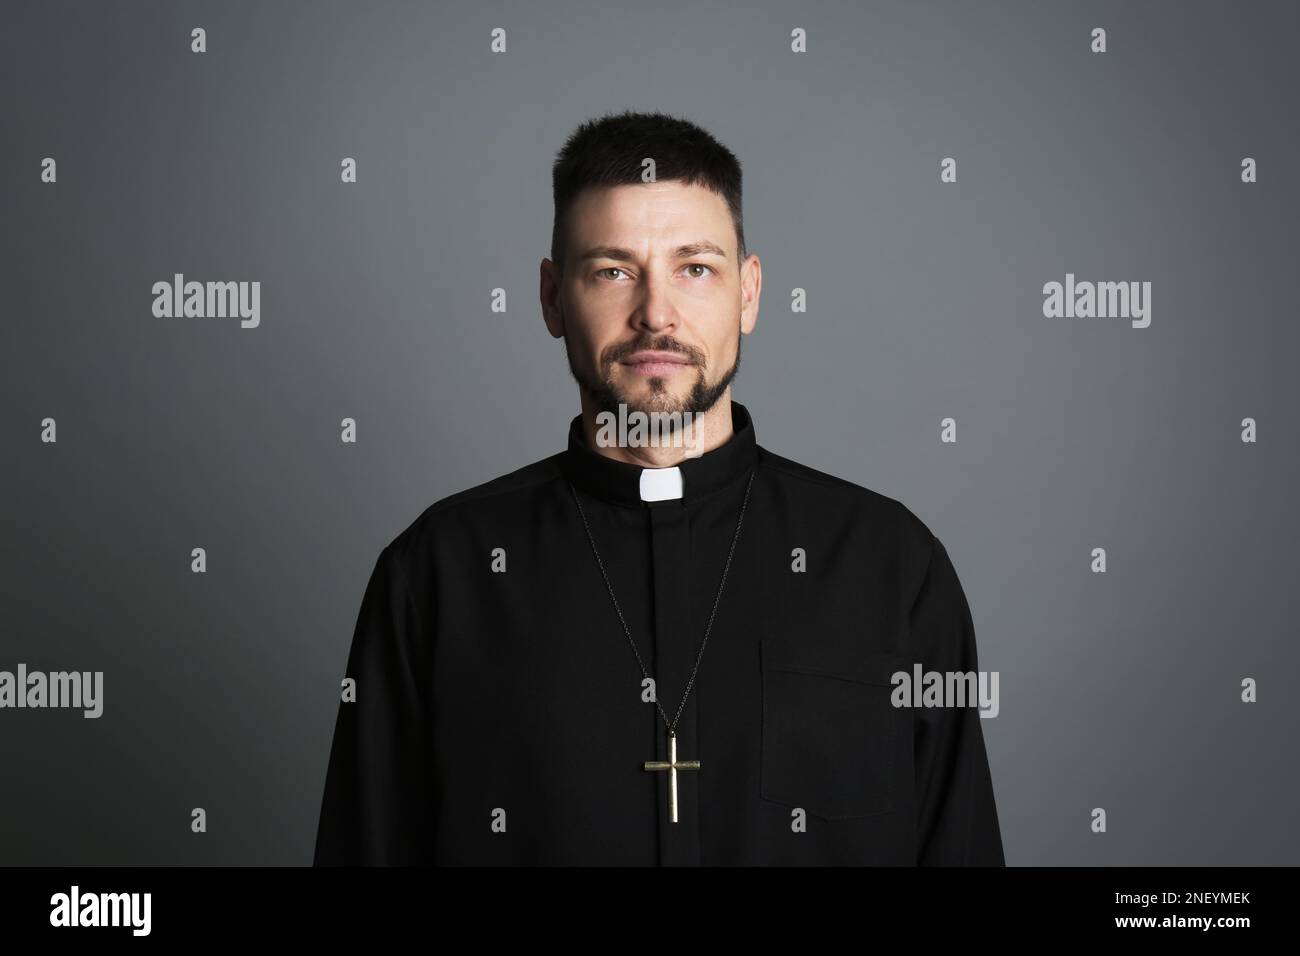 Priest wearing cassock with clerical collar on grey background Stock Photo